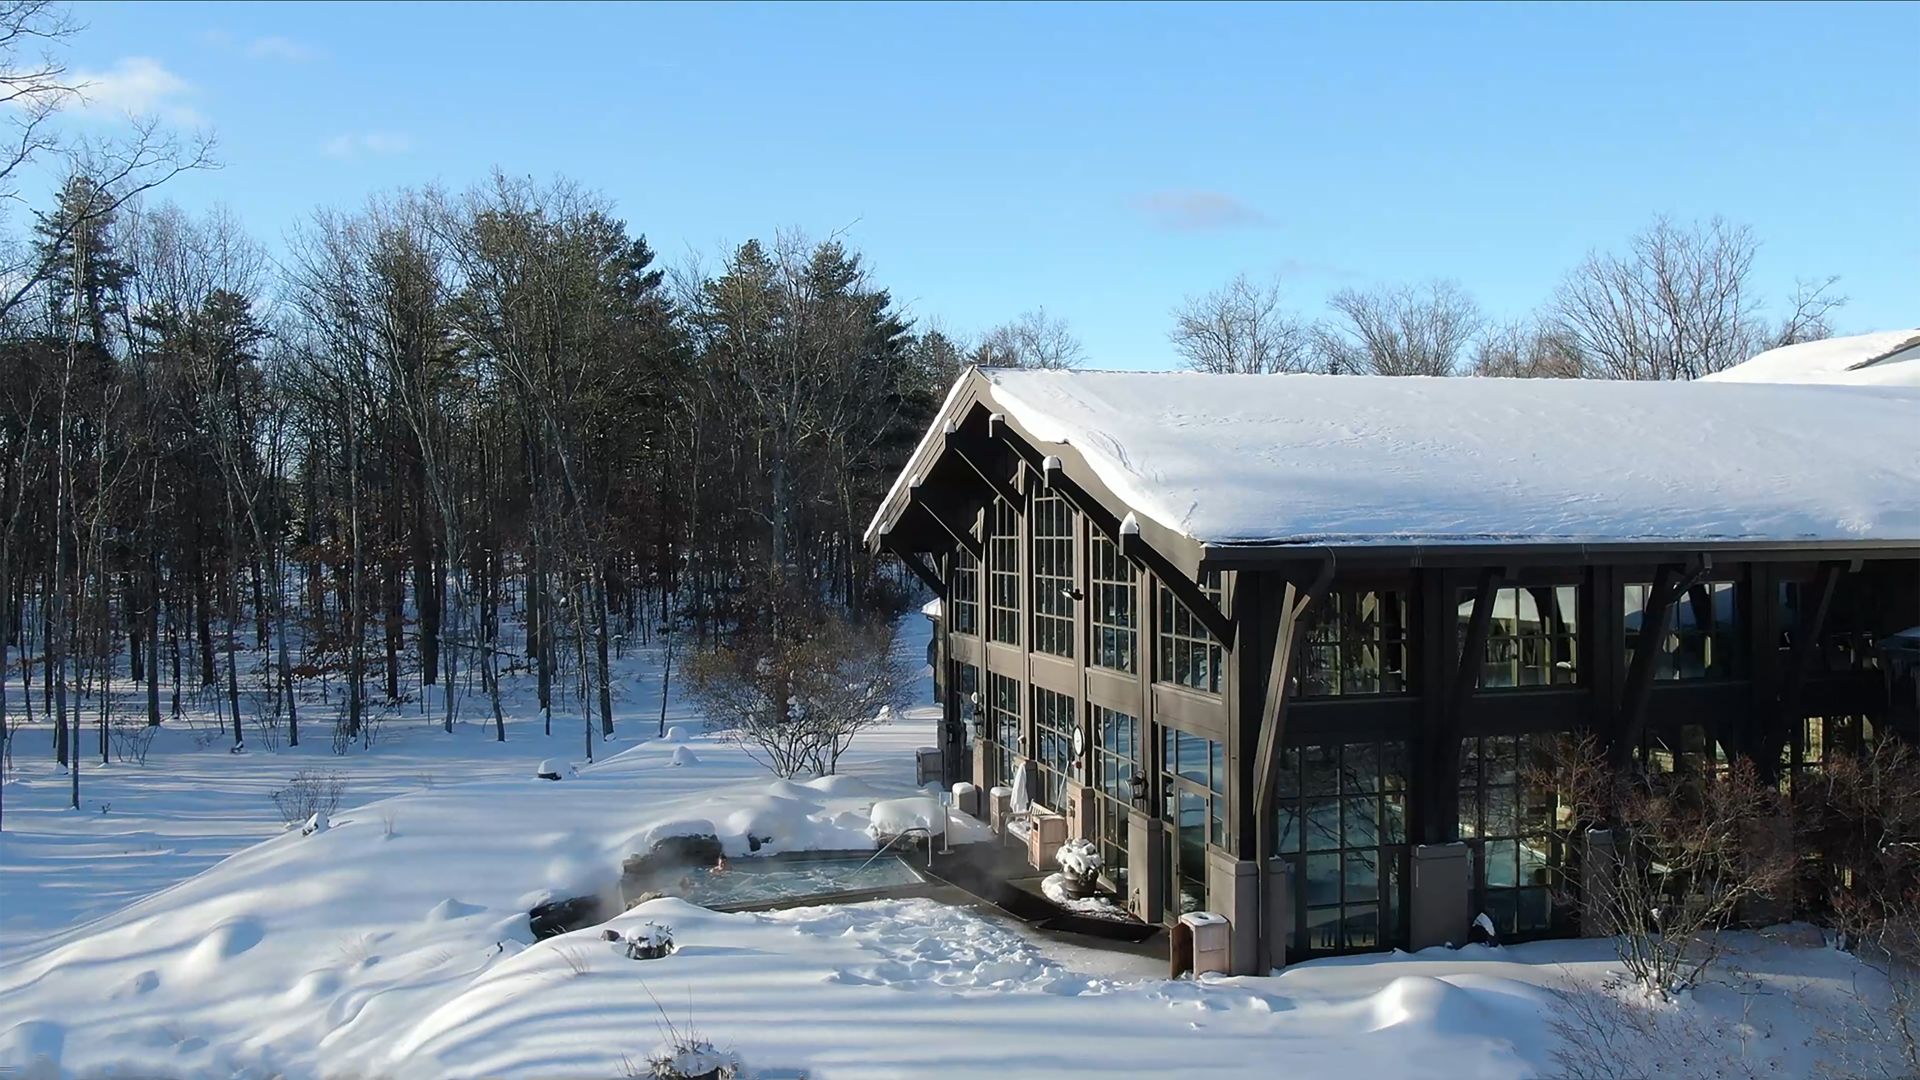 The Lodge at Woodloch and an outdoor horizon edge whilrpool on a sunny day after a fresh snowstorm